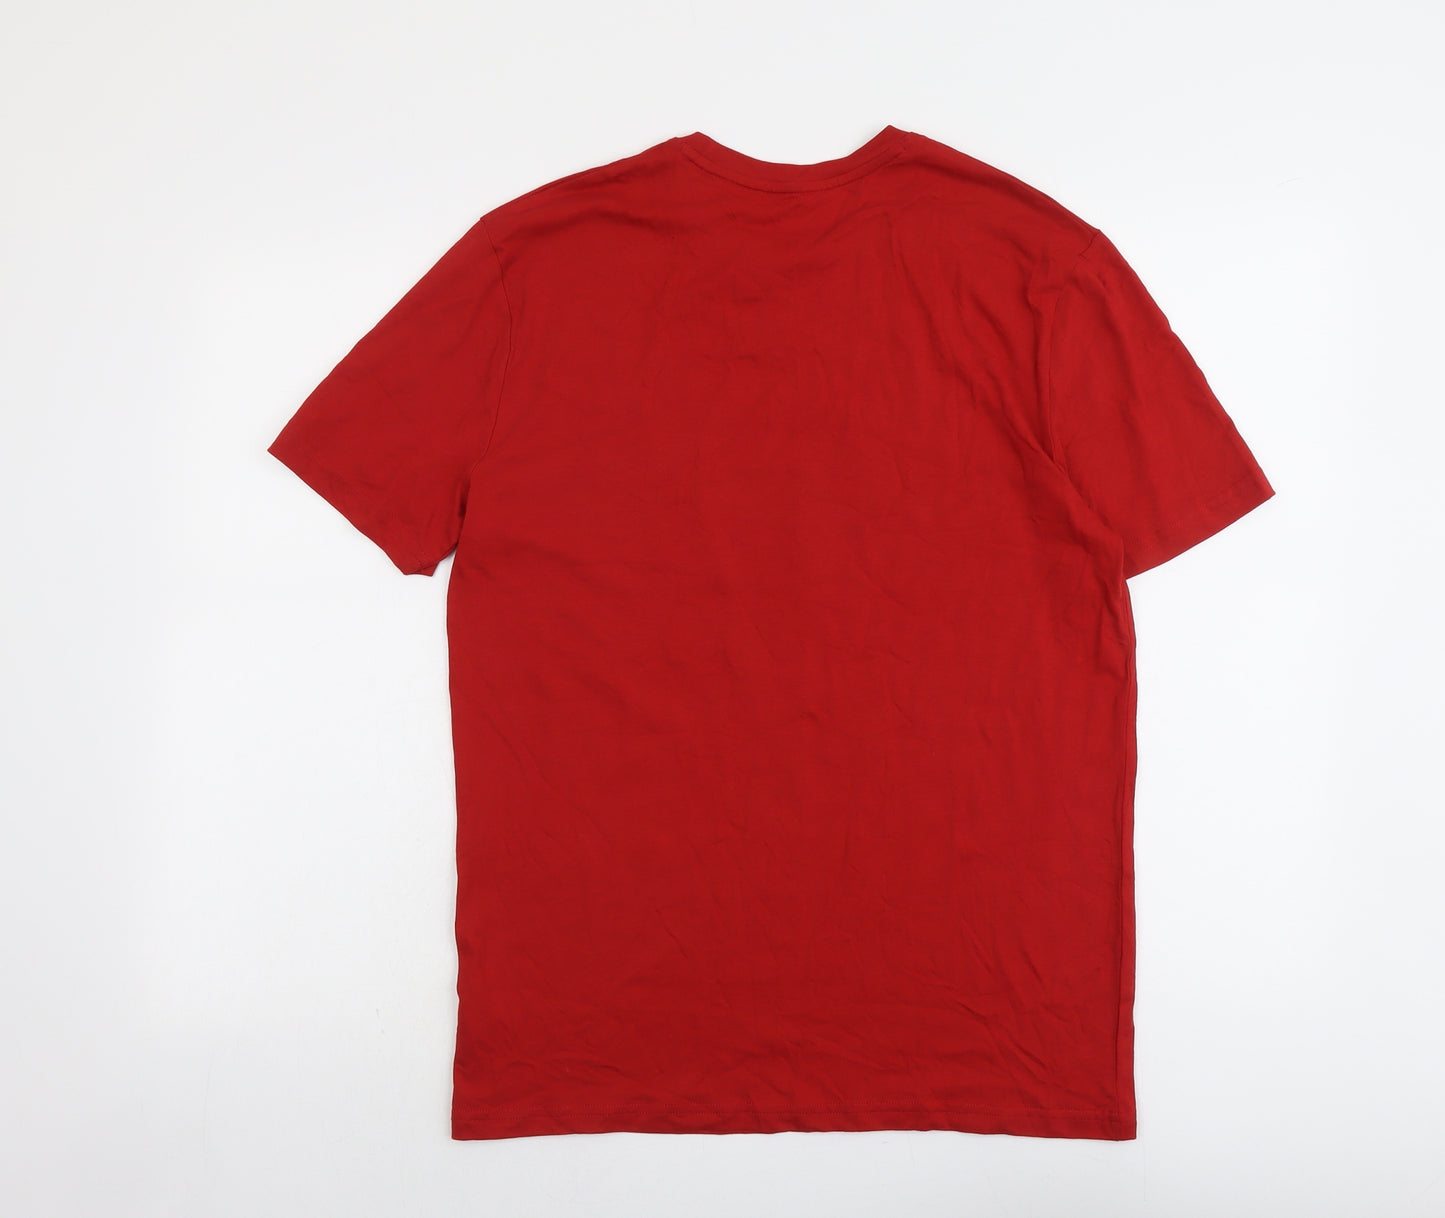 Marks and Spencer Mens Red Cotton T-Shirt Size S Round Neck - Merry Christmas Brew-Dolph Reindeer